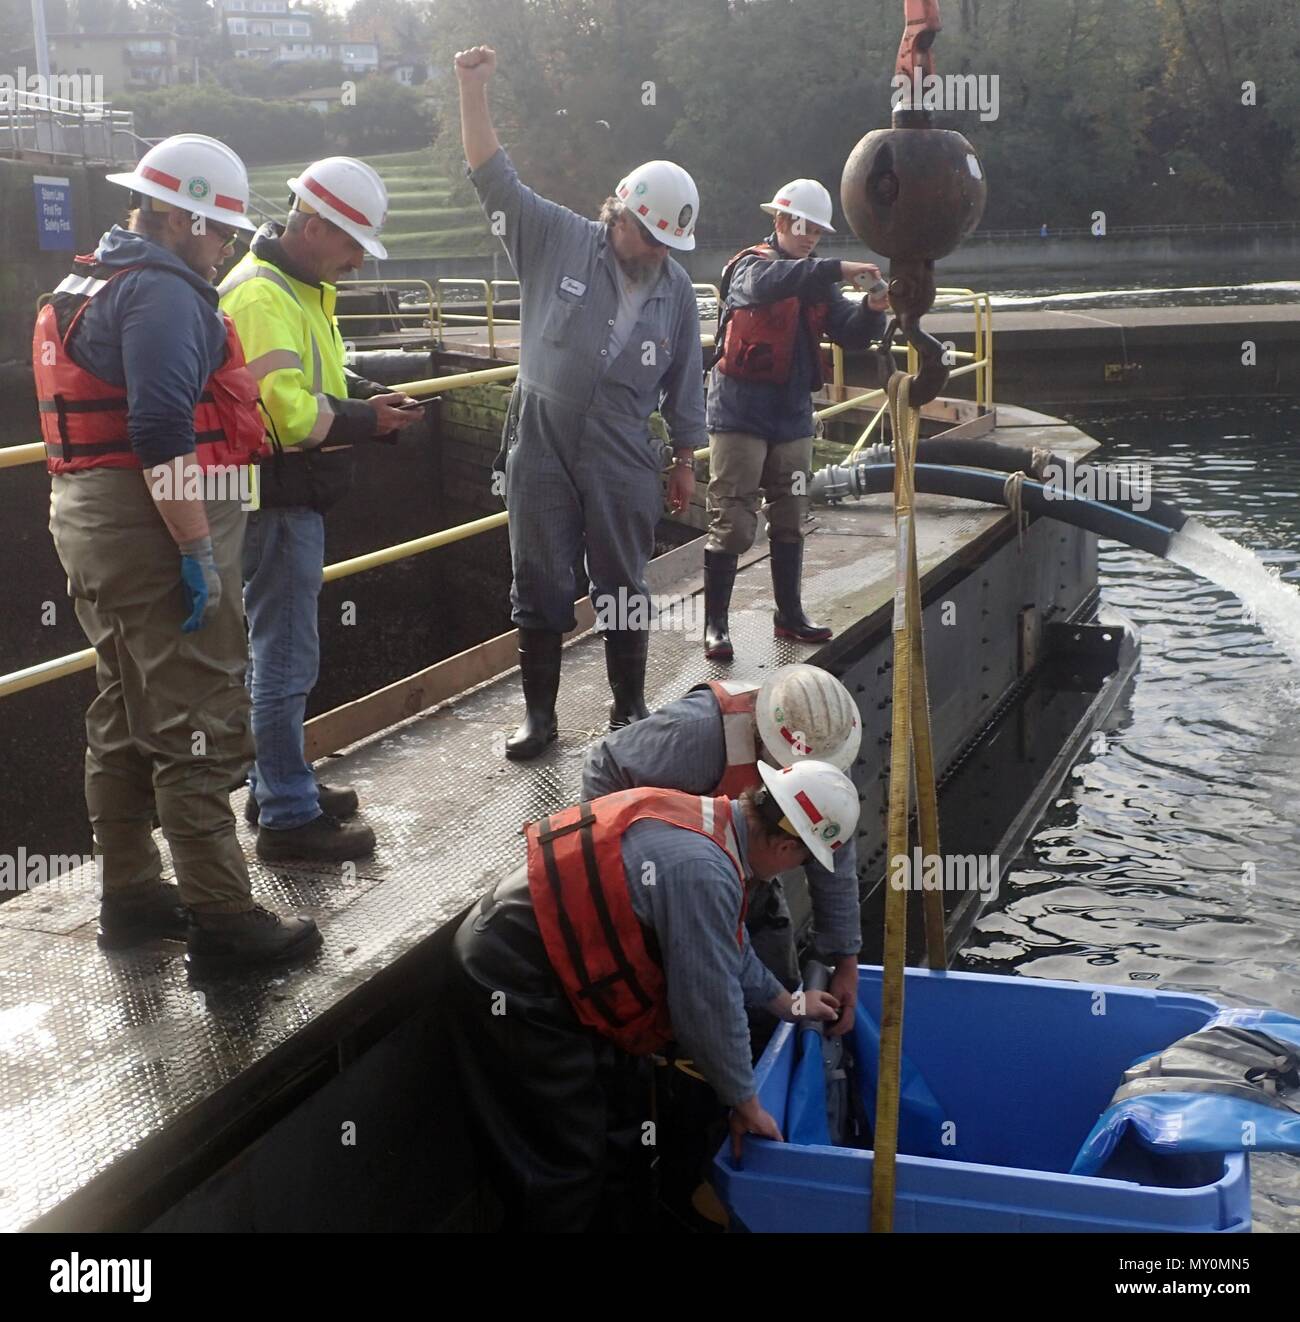 Maintenance workers and fish-rescue team members release a white sturgeon rescued from the bottom of the Hiram M. Chittenden Locks during the annual maintenance pump out November 10. Each year, Corps natural resource staff, fish biologists, scientists and volunteers go on a fish-rescue mission when the locks are drained. To ensure Endangered Species Act listed fish are safe, the team must capture, haul them out of the 50-foot deep chamber and release them. The team doesn’t limit its efforts to ESA listed species and this year the rescue included an estimated 100-pound sturgeon. (U.S. Army Corp Stock Photo